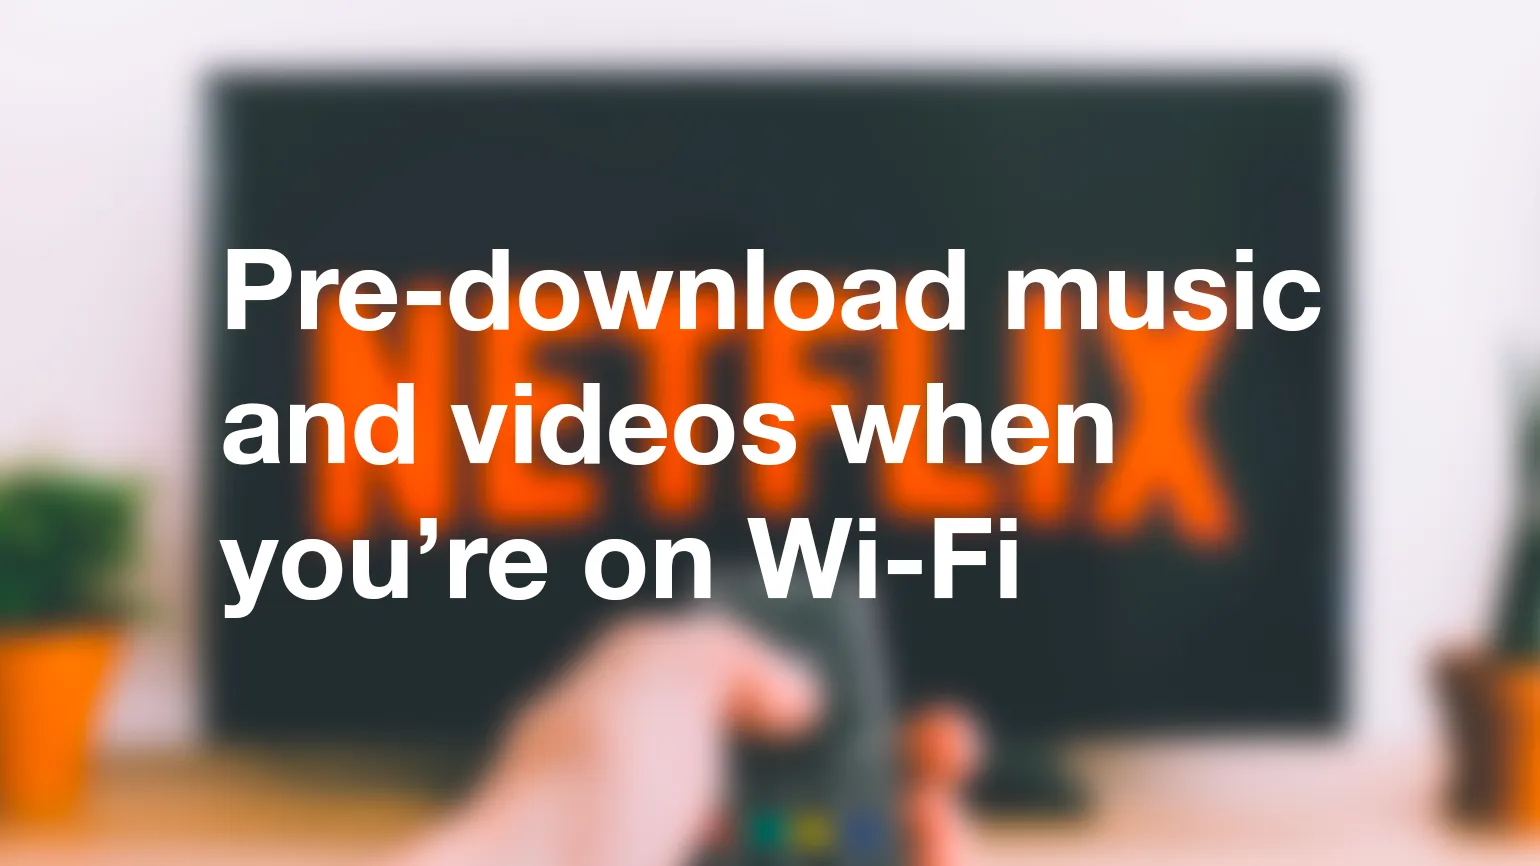 Pre-download music and videos when you’re on Wi-Fi